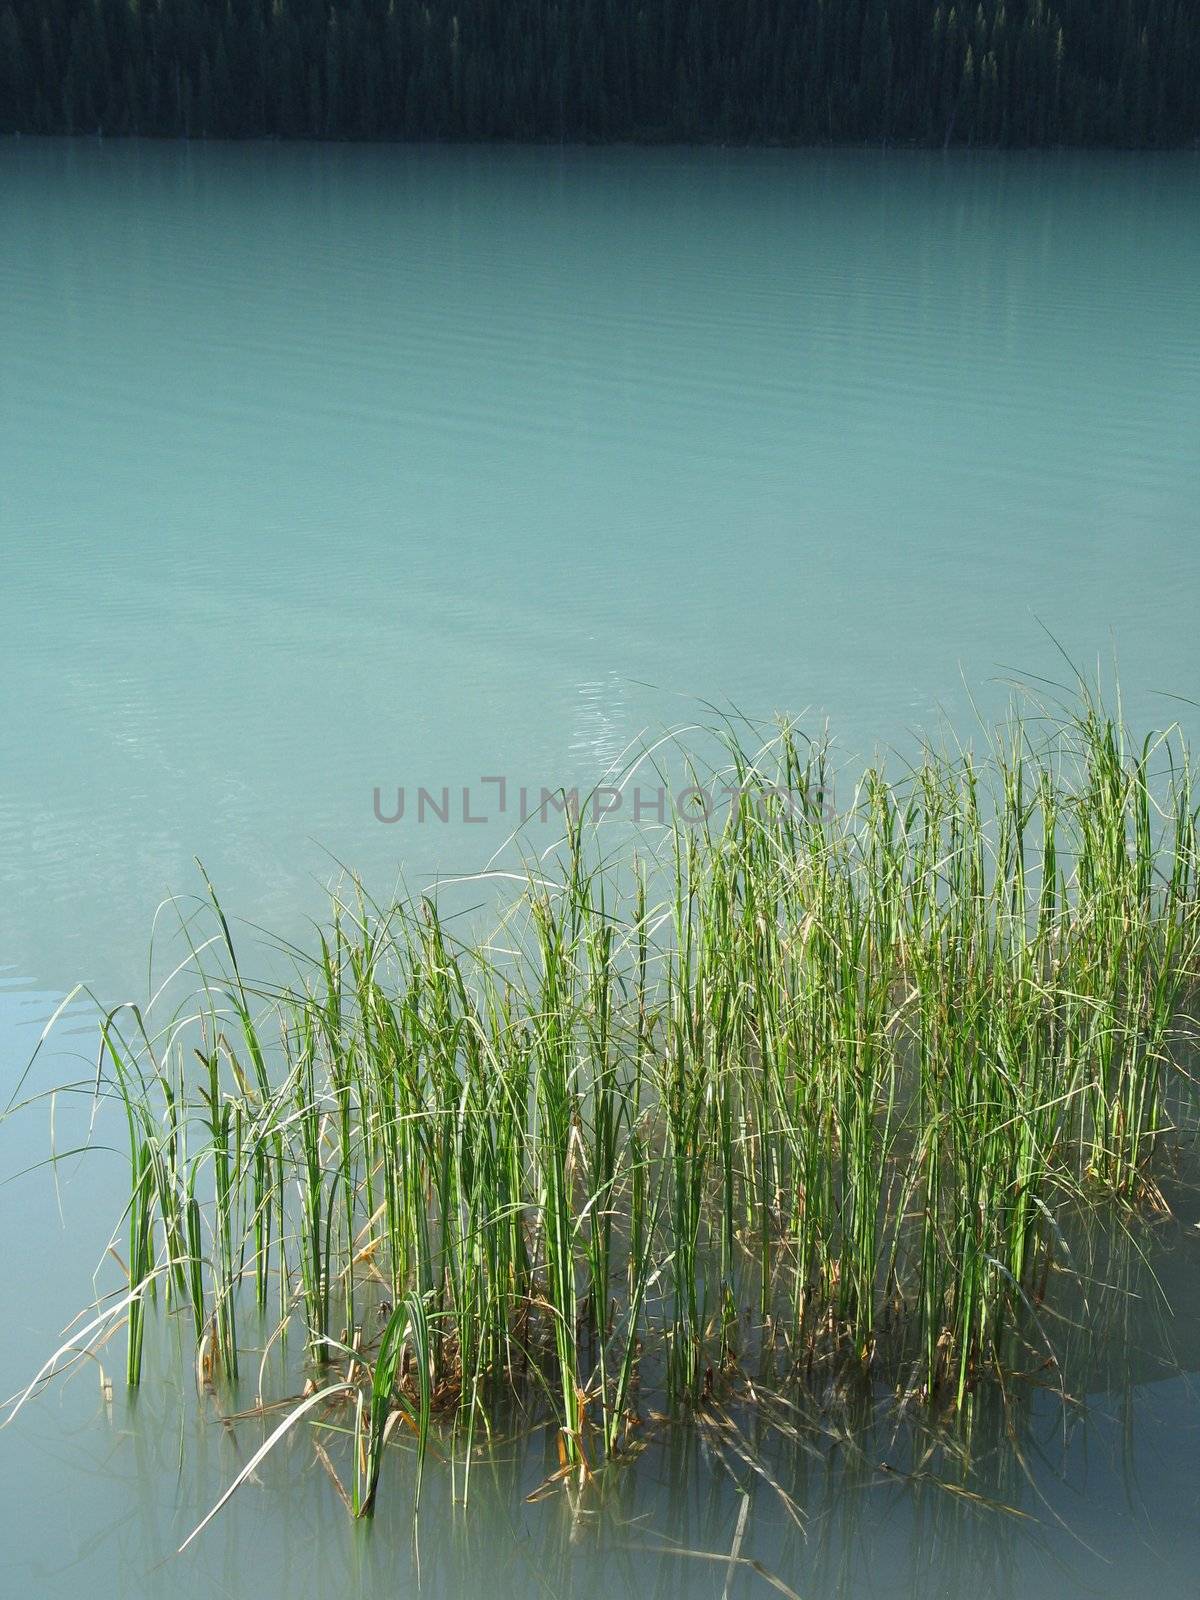  reeds in a green lake